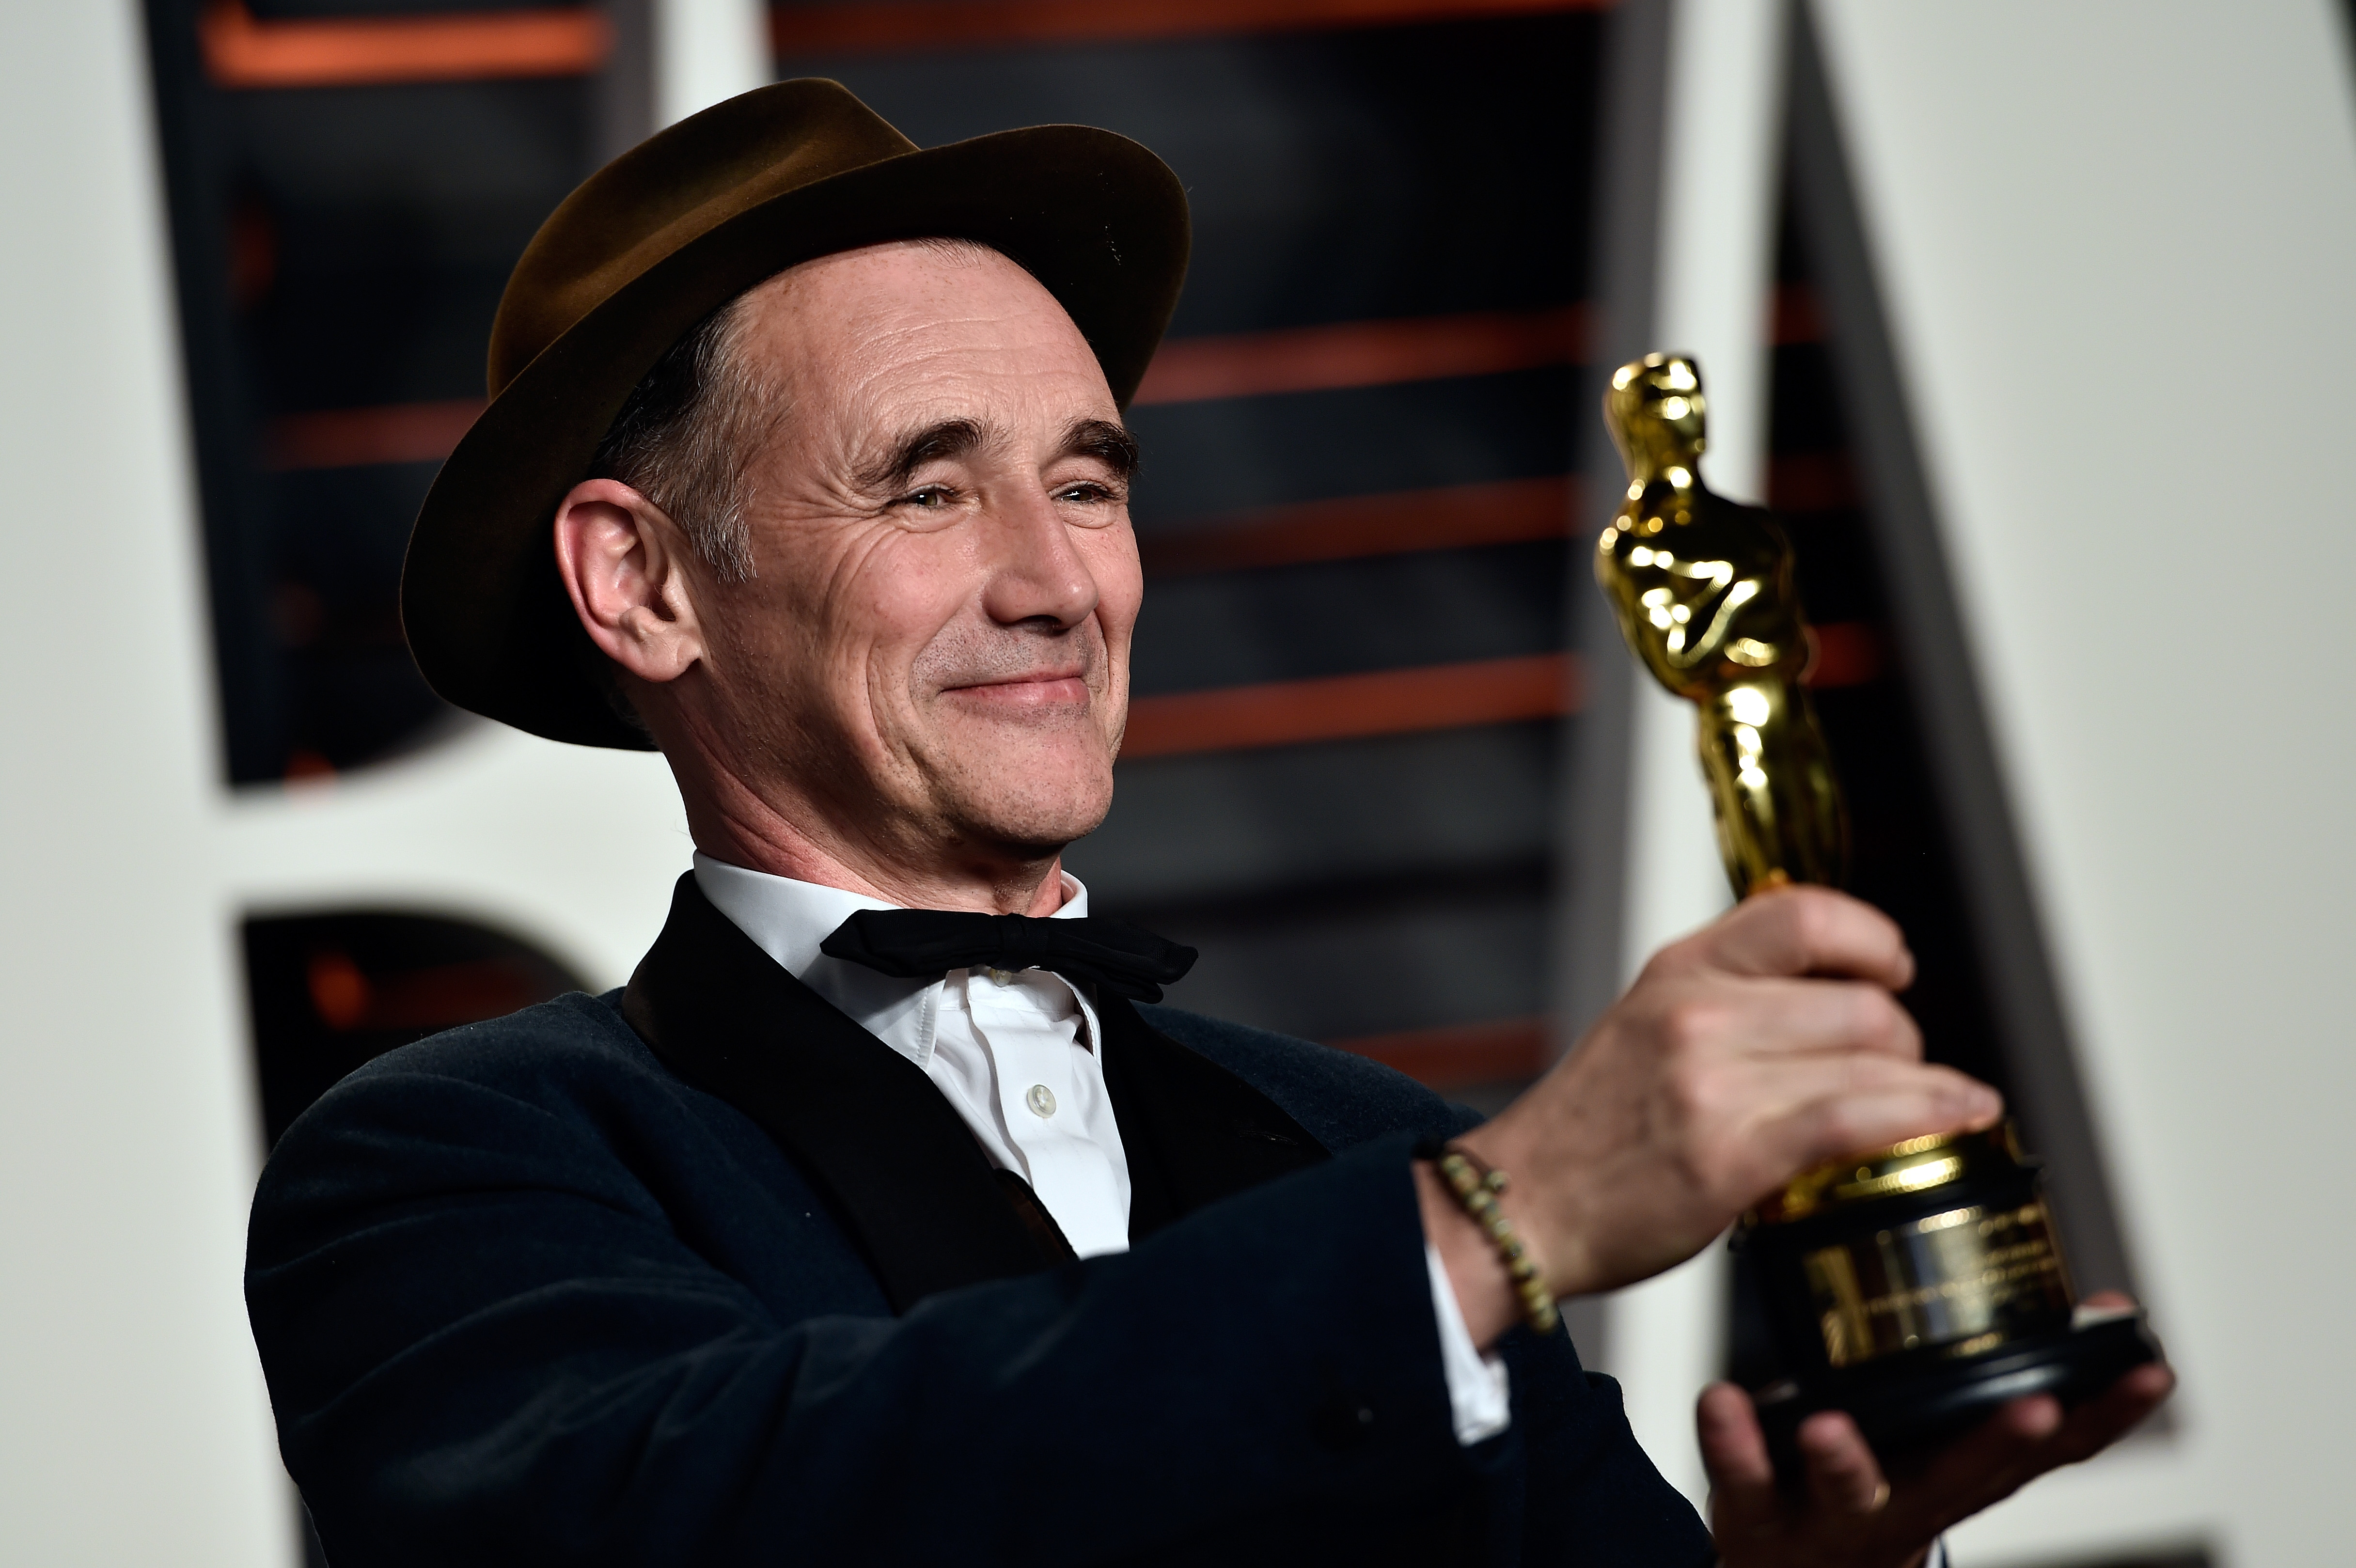 BEVERLY HILLS, CA - FEBRUARY 28: Actor Mark Rylance attends the 2016 Vanity Fair Oscar Party Hosted By Graydon Carter at the Wallis Annenberg Center for the Performing Arts on February 28, 2016 in Beverly Hills, California. (Photo by Pascal Le Segretain/Getty Images)